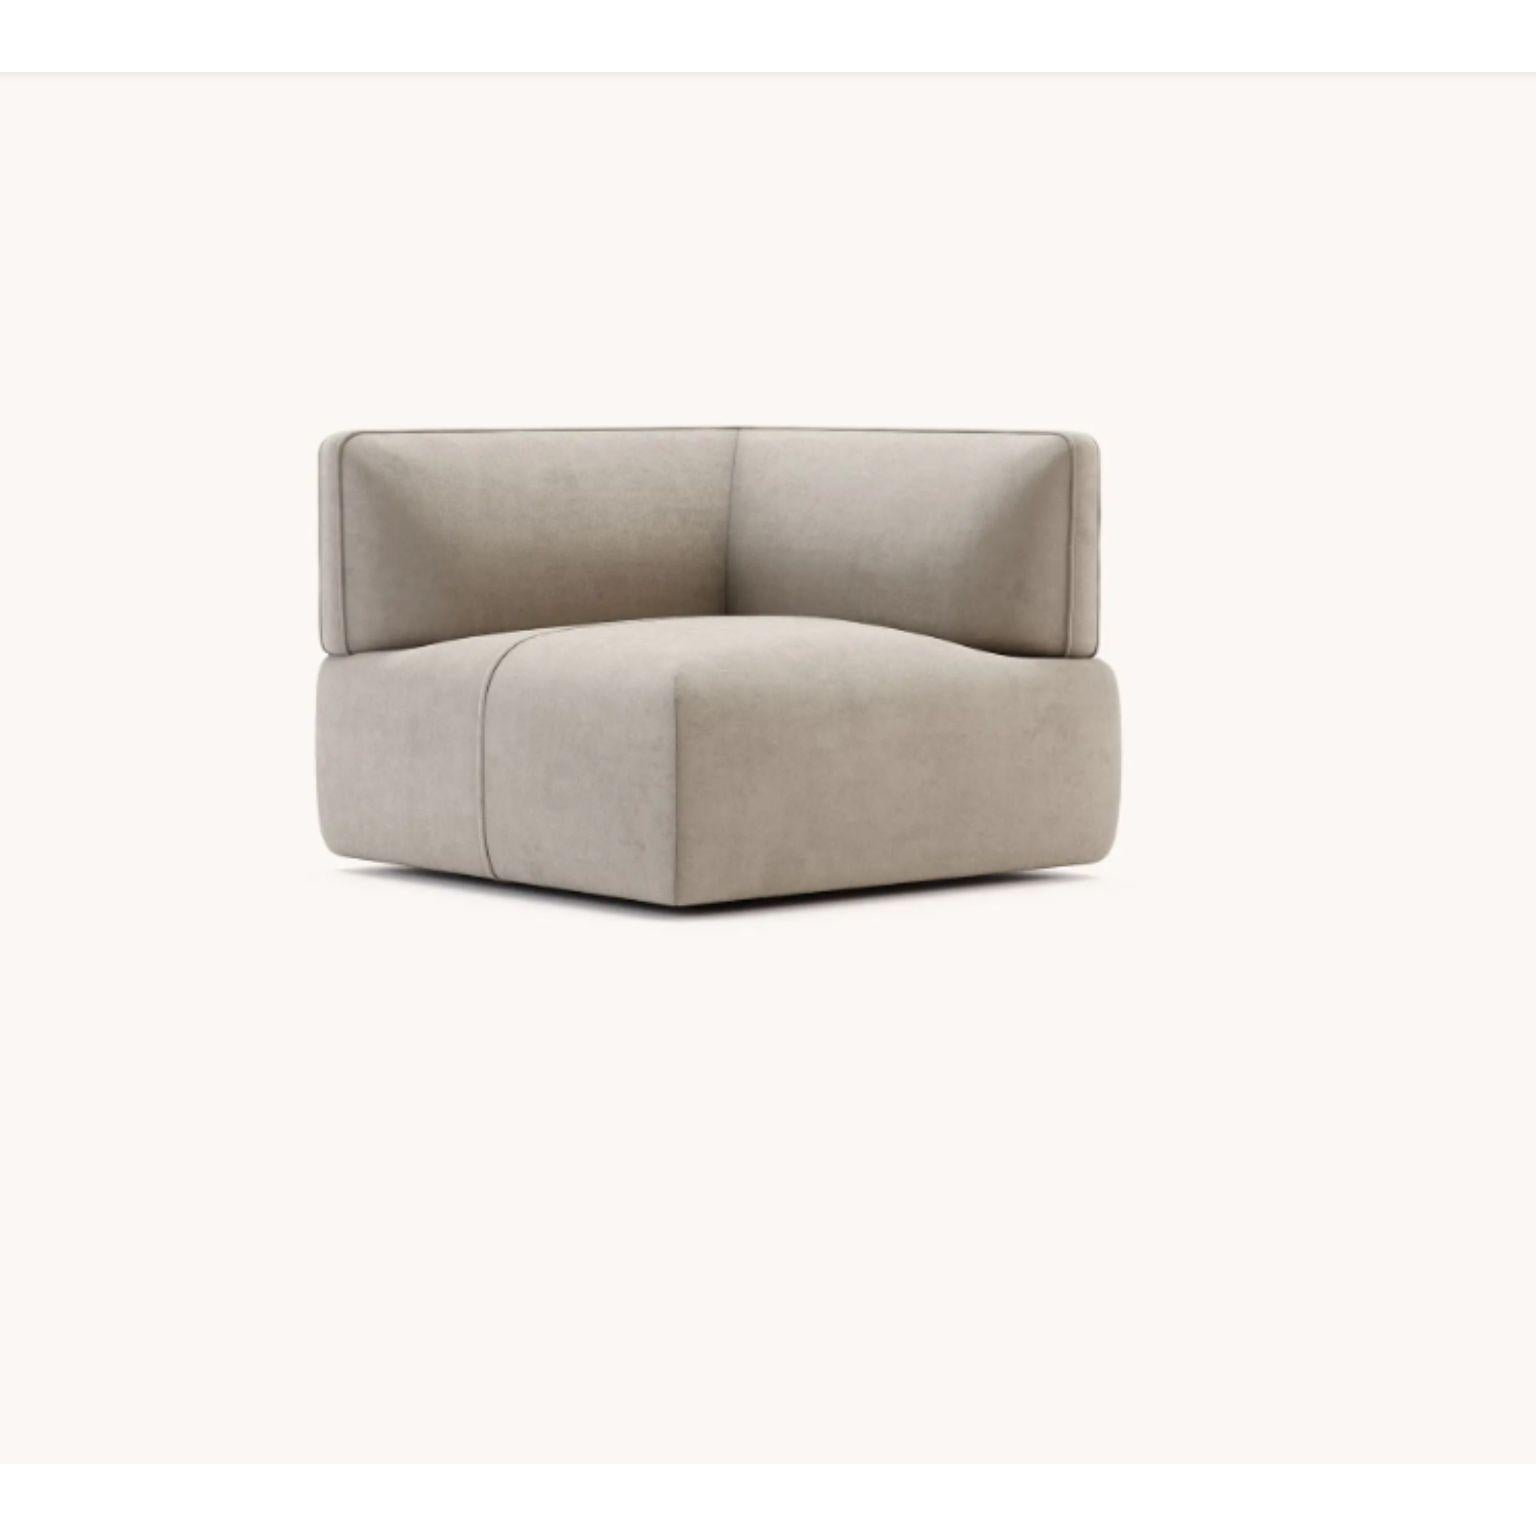 Disruption Module Corner by Domkapa
Materials: Velvet (Aldan 2928). 
Dimensions: W 100 x D 100 x H 80 cm.
Also available in different materials. Please contact us.

Disruption is a modular sofa, fully upholstered, with minimalistic design and